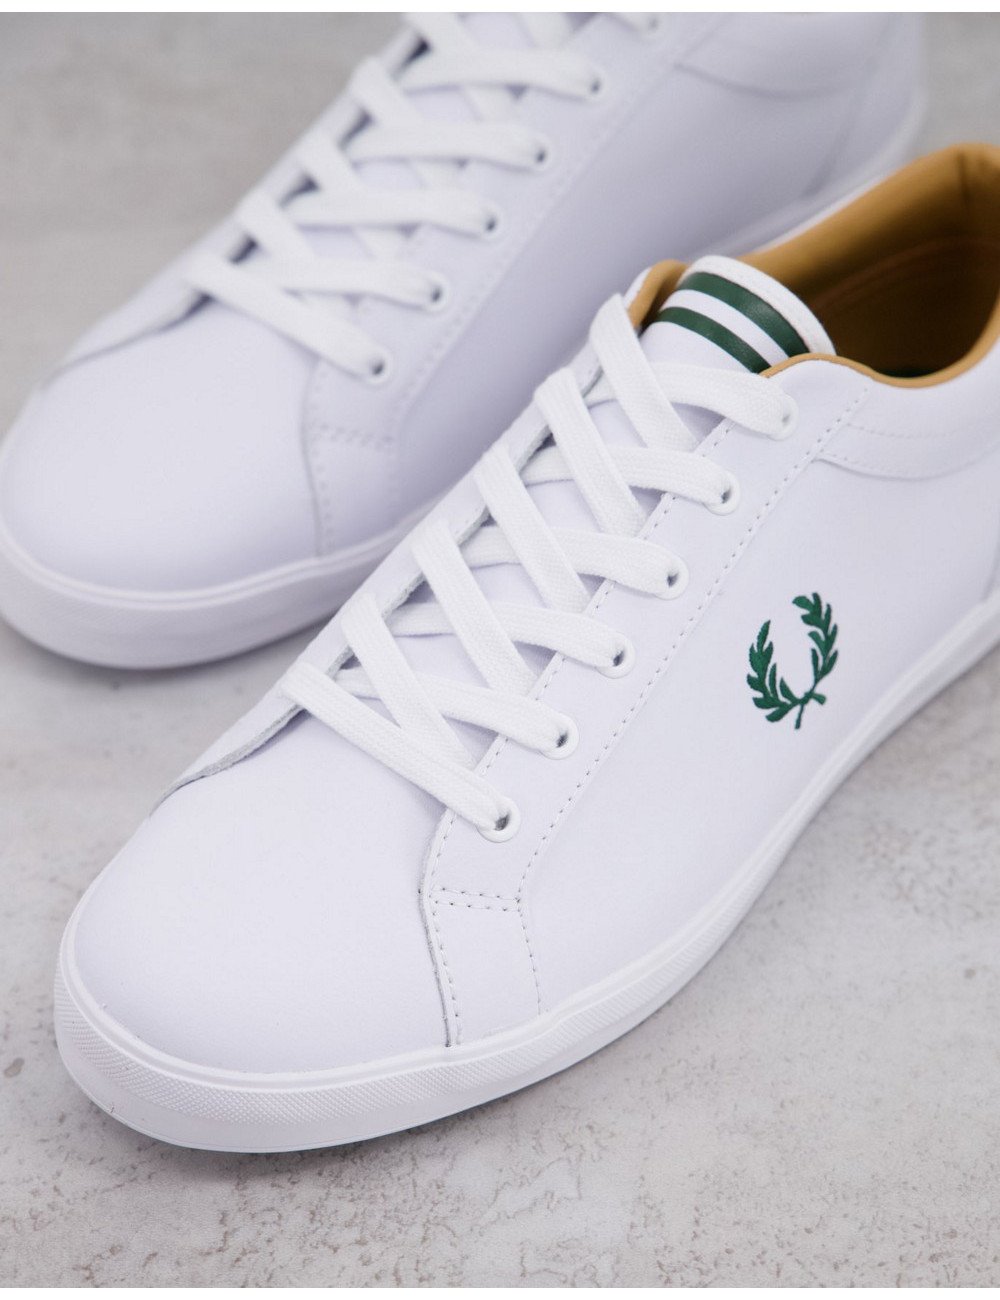 Fred Perry logo leather...